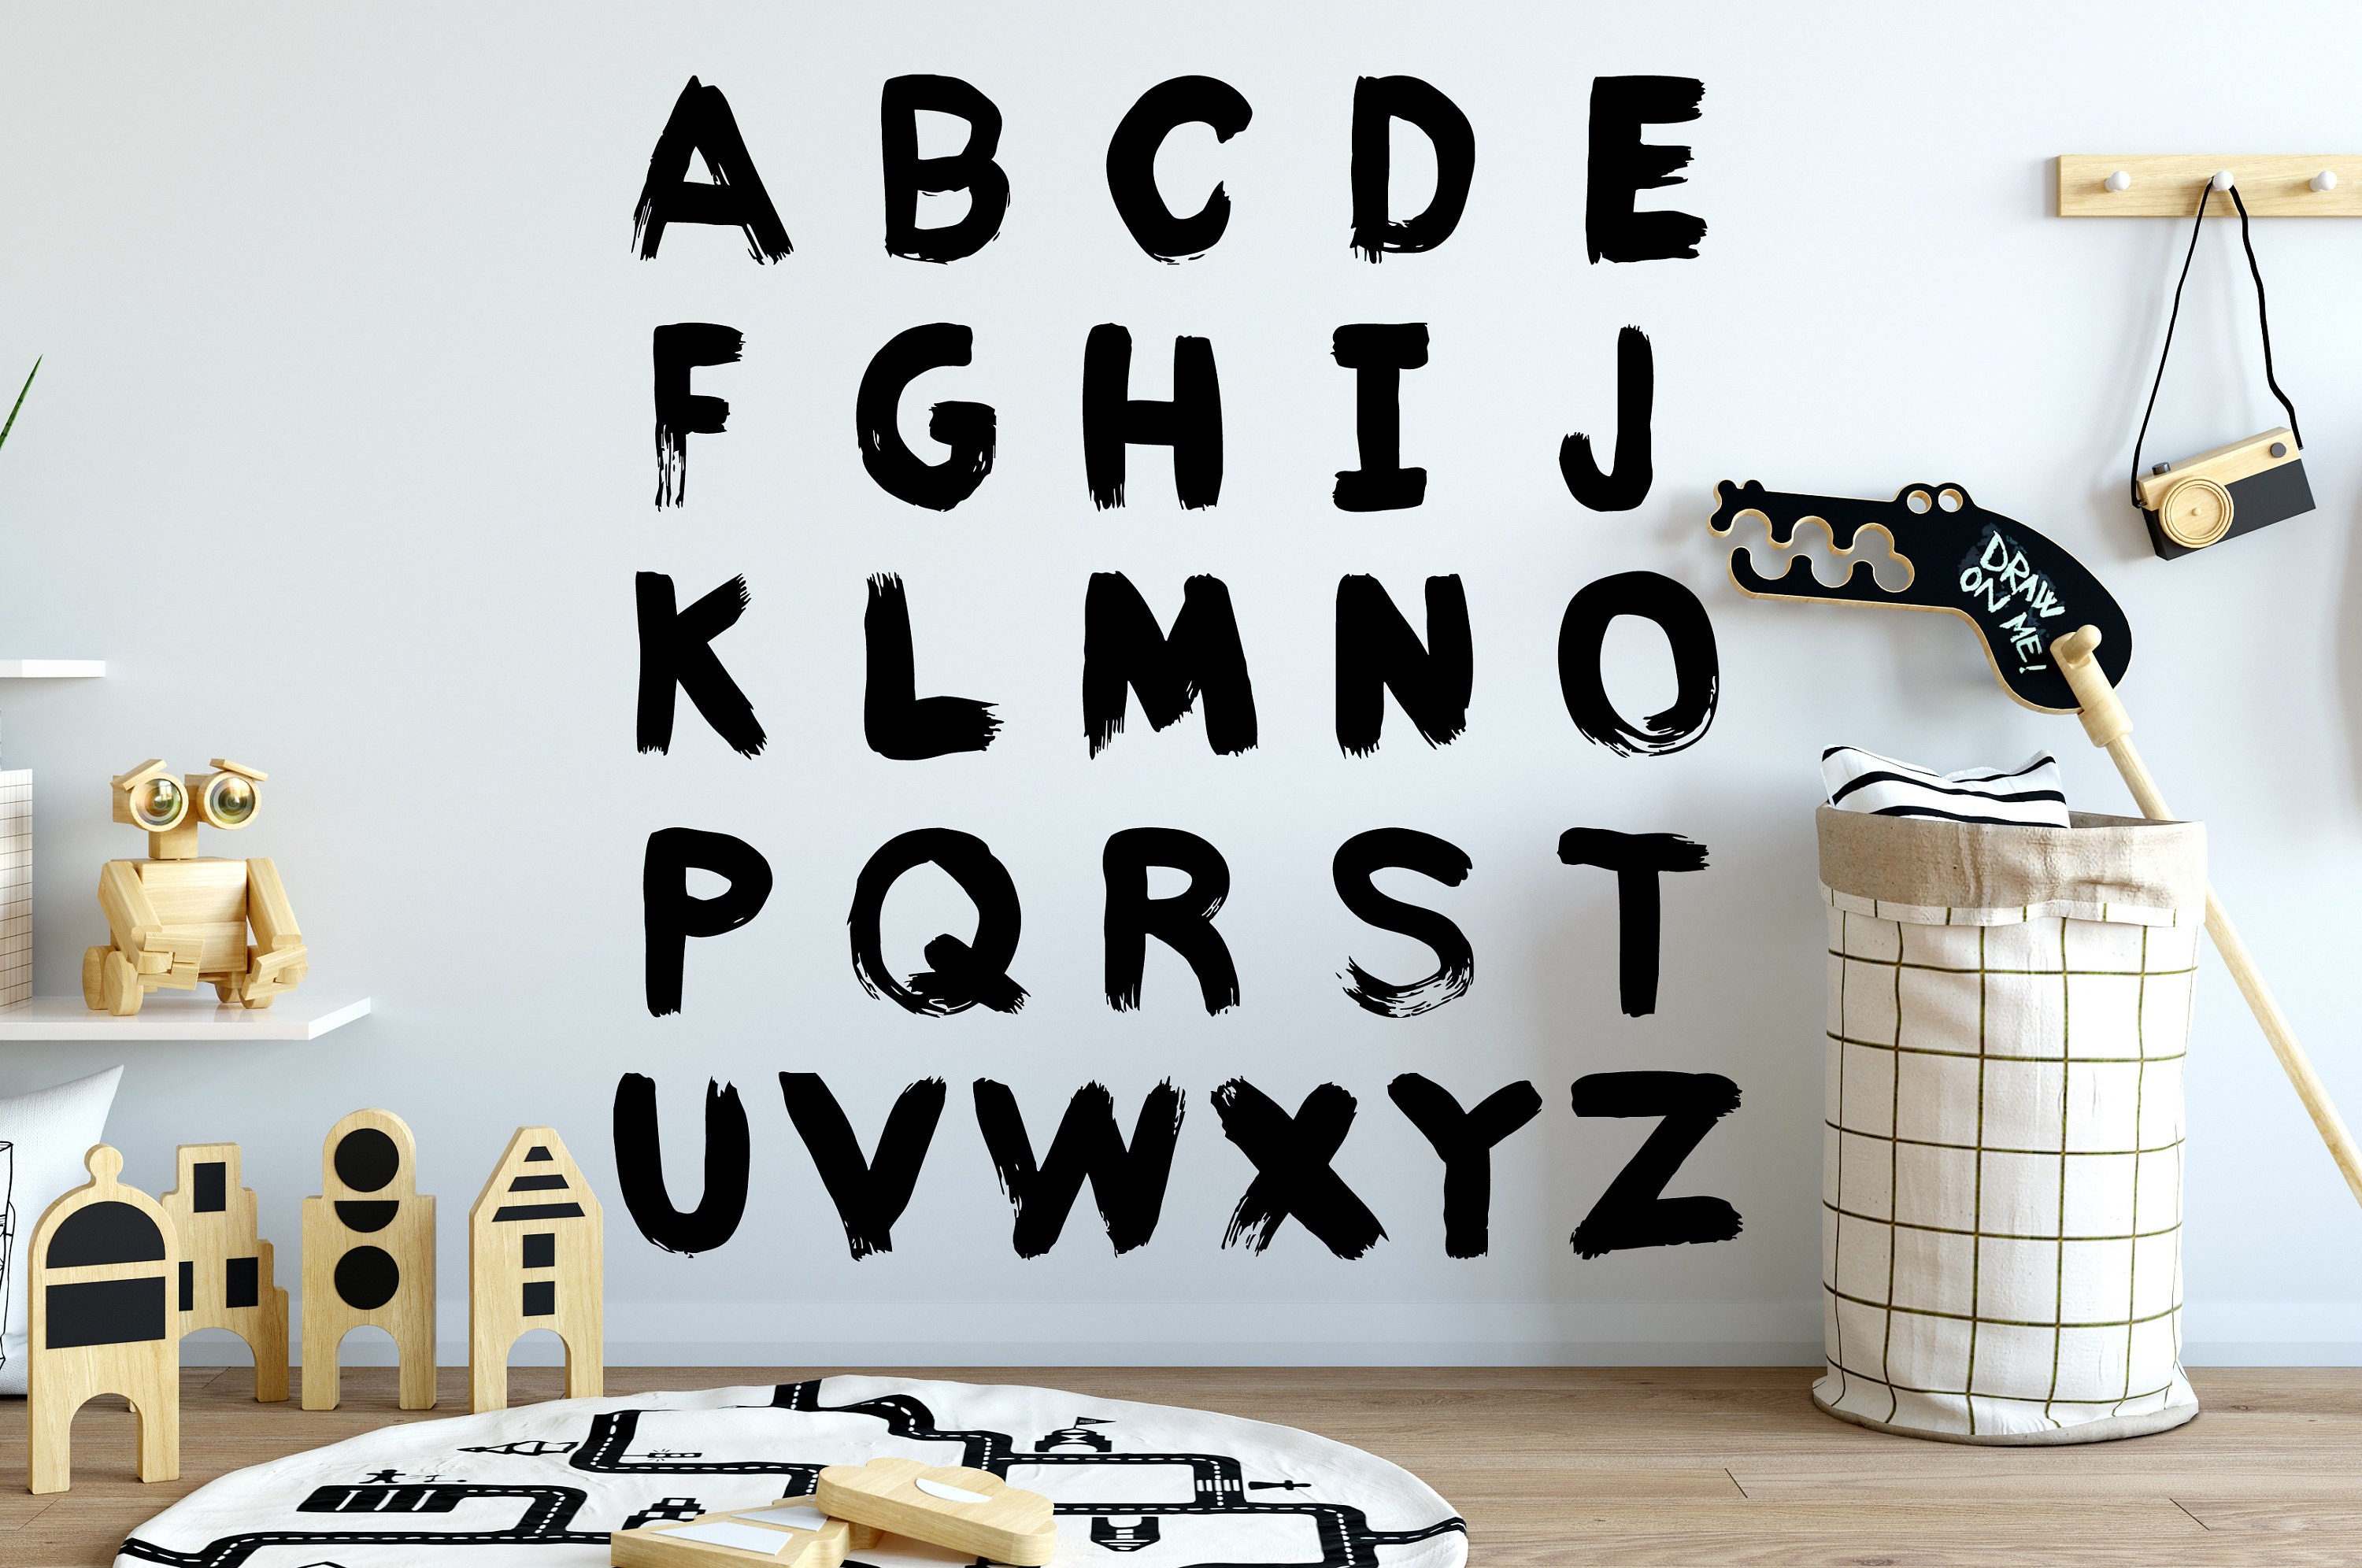 Animal Alphabet and Numbers Printed Wall Decals Kids Wall Decor Abc Decals  Abc Wall Art Alphabet Wall Decal Home School Decor Letters 